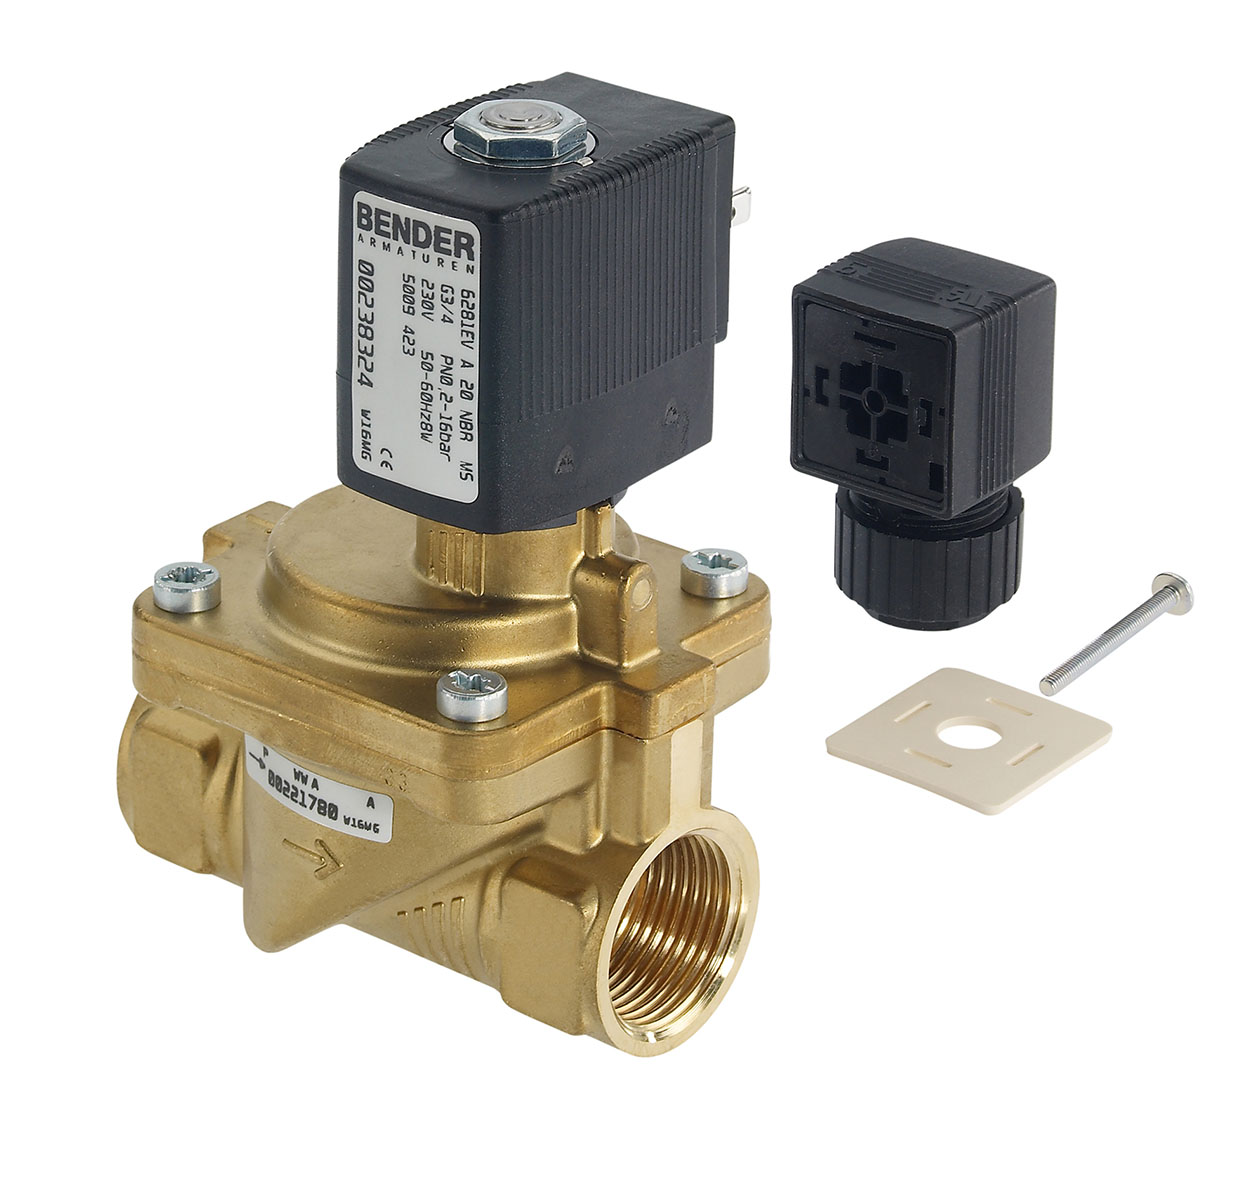 5009404 - 2/2 way solenoid valve normally closed for fluids and compressed air Type 3; female thread